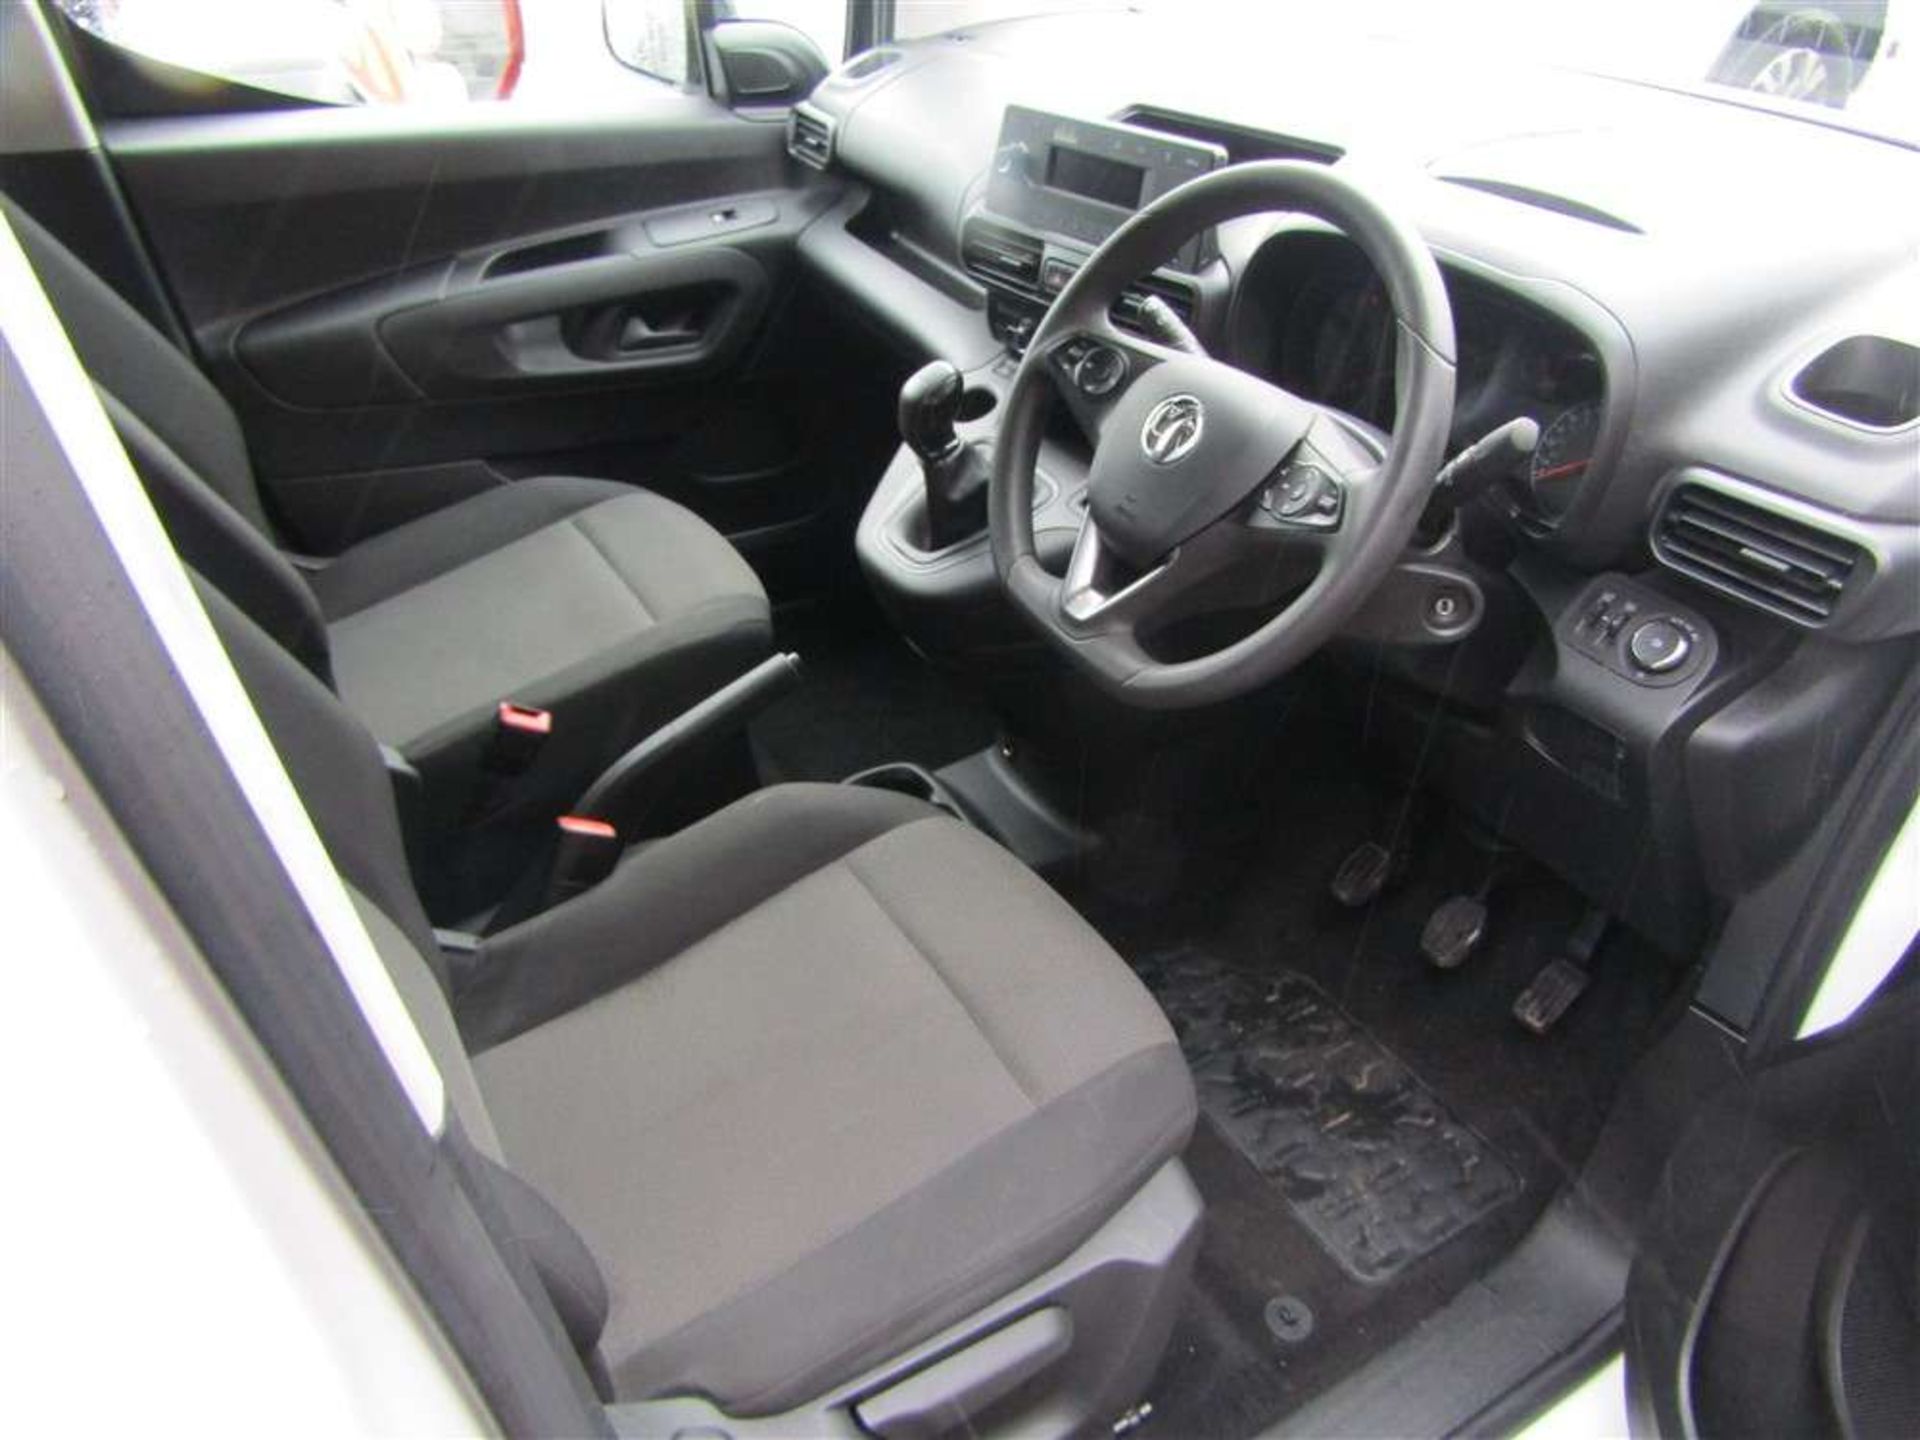 2020 70 reg Vauxhall Combo L1H1 2300 Sportive S/S - Image 7 of 7